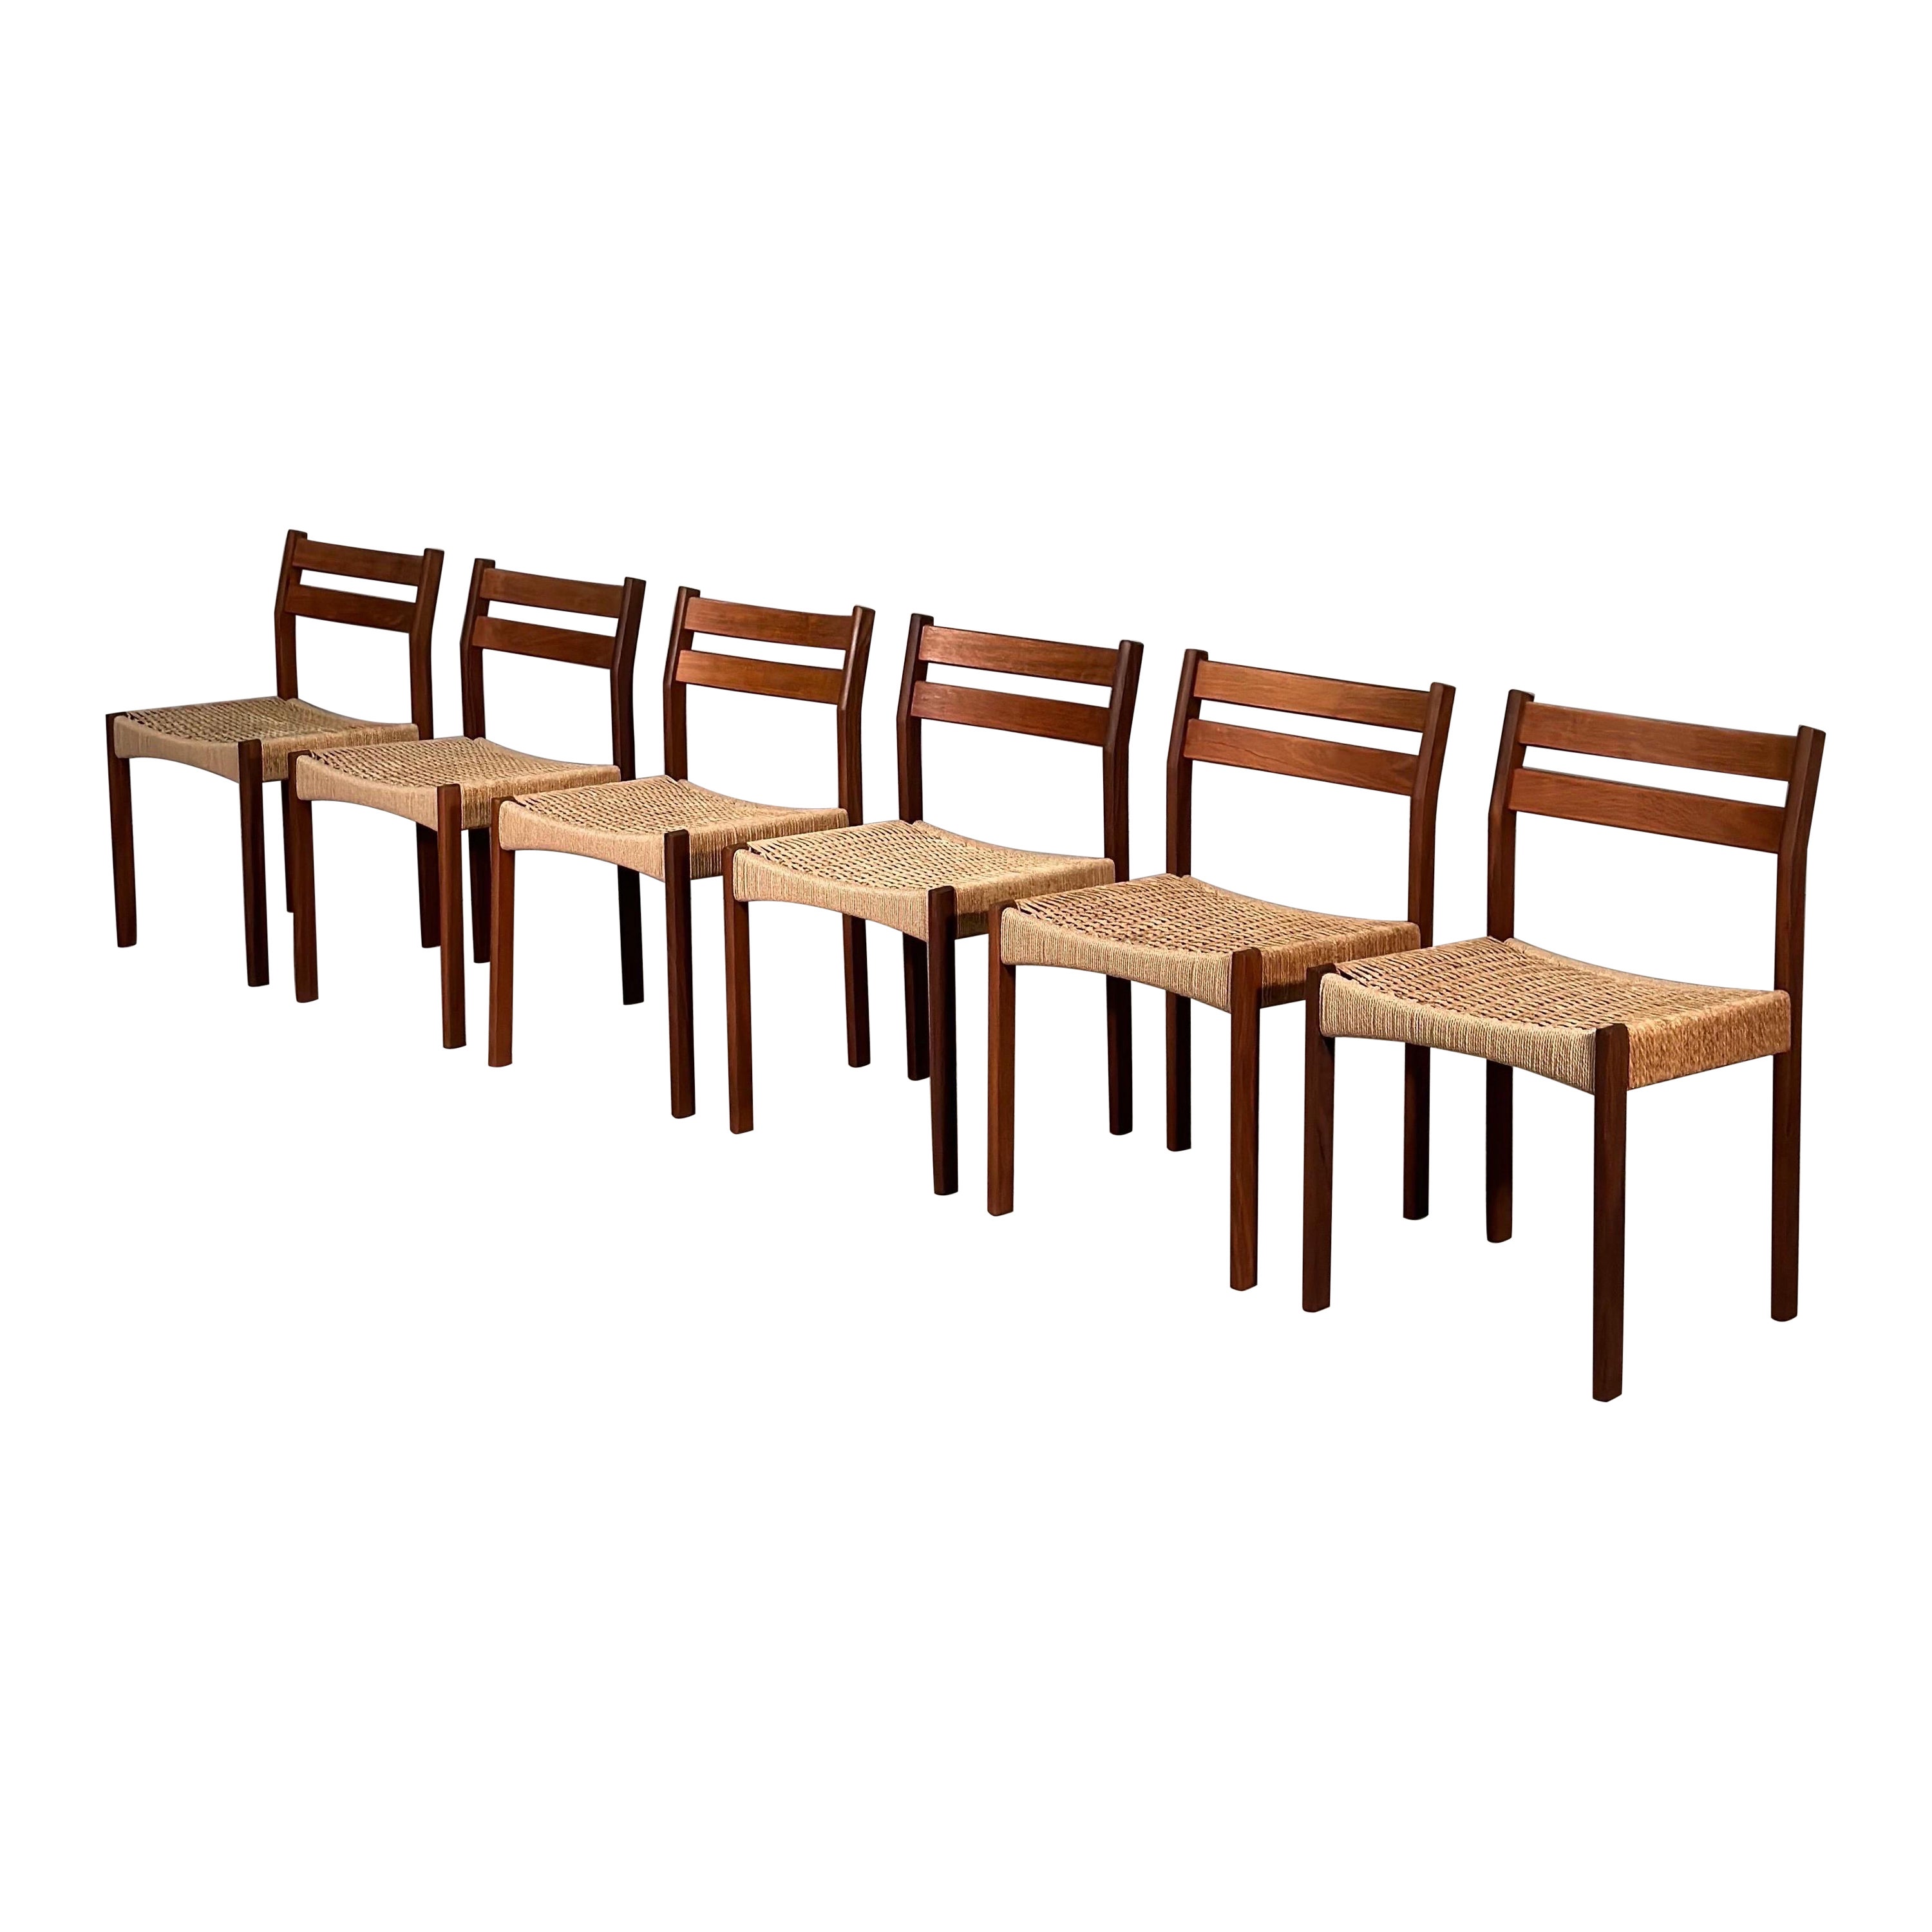 Set of 6 Danish Teak And Paper Cord Dining Chairs Designed By Arne Hovmand Olsen